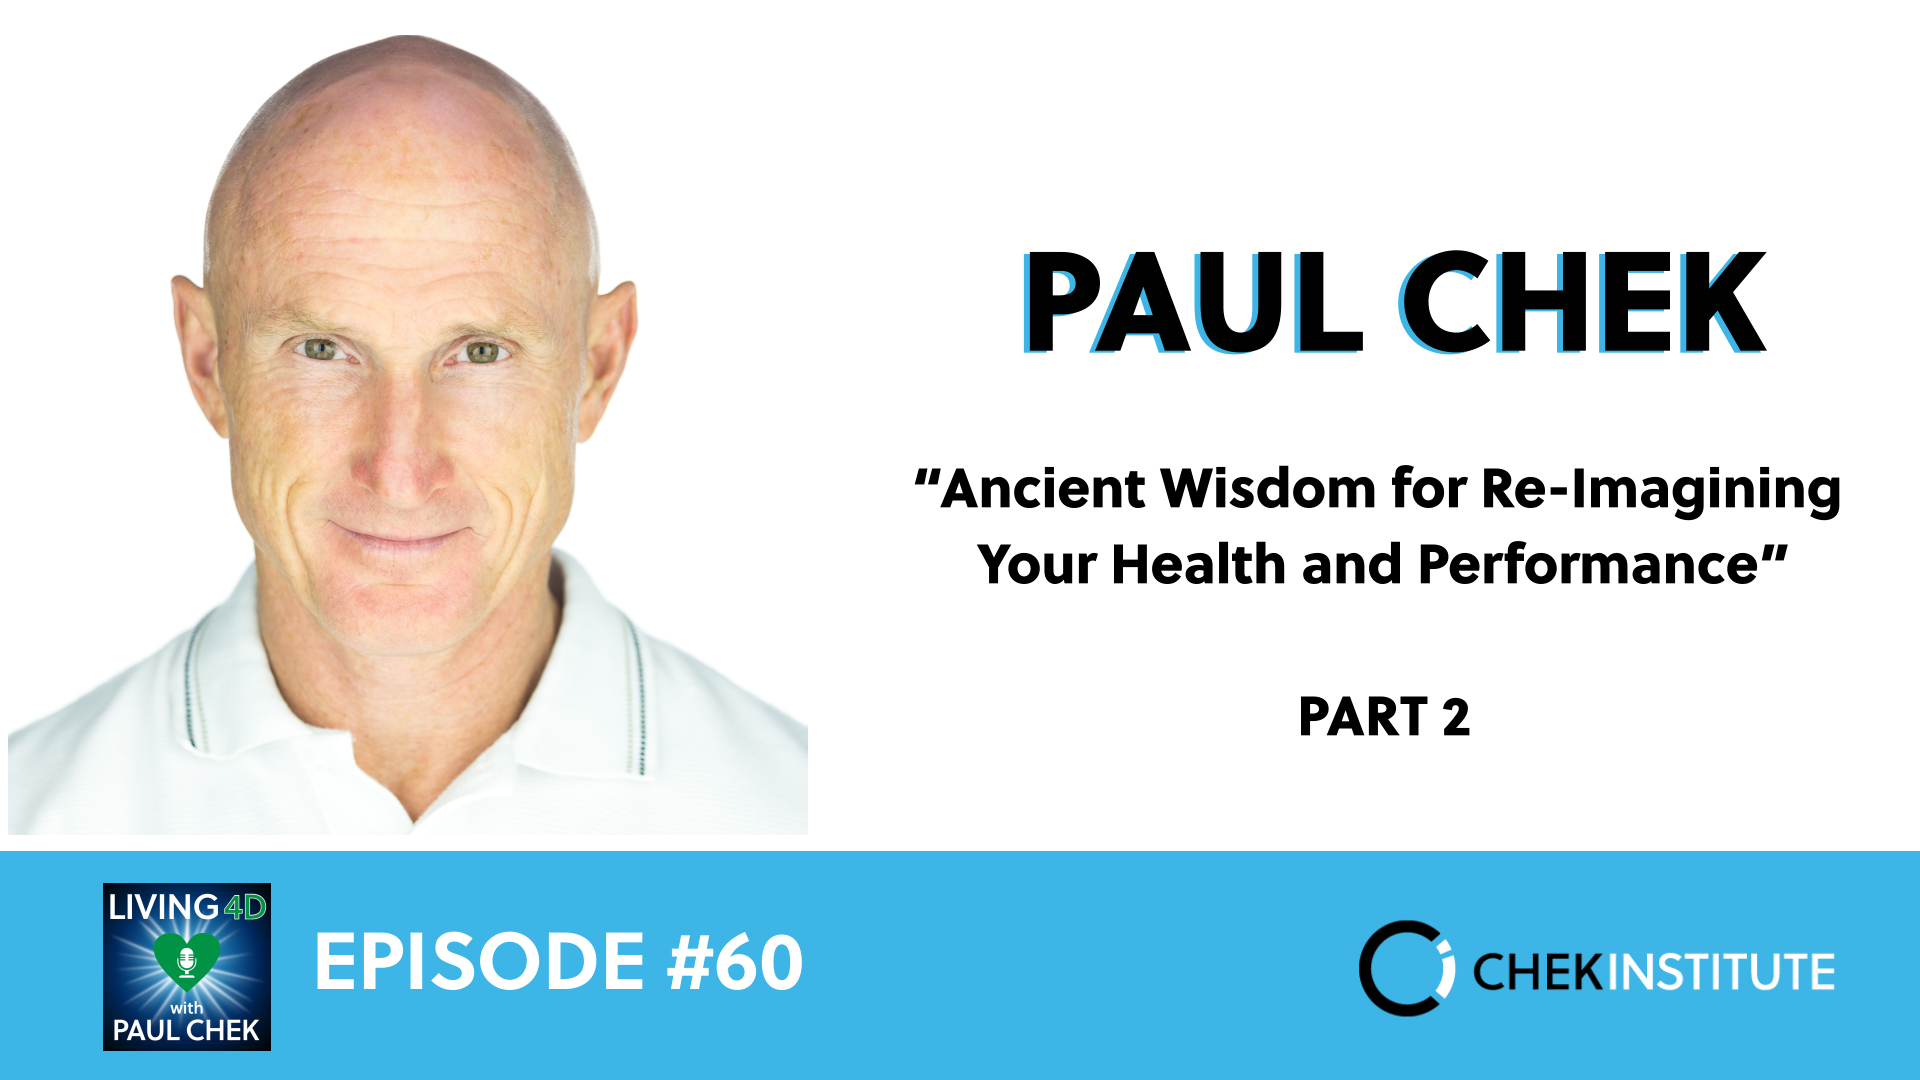 EP 60 - Paul Chek: Tips to Achieve Integral Consciousness (and Why You Want to Achieve it)